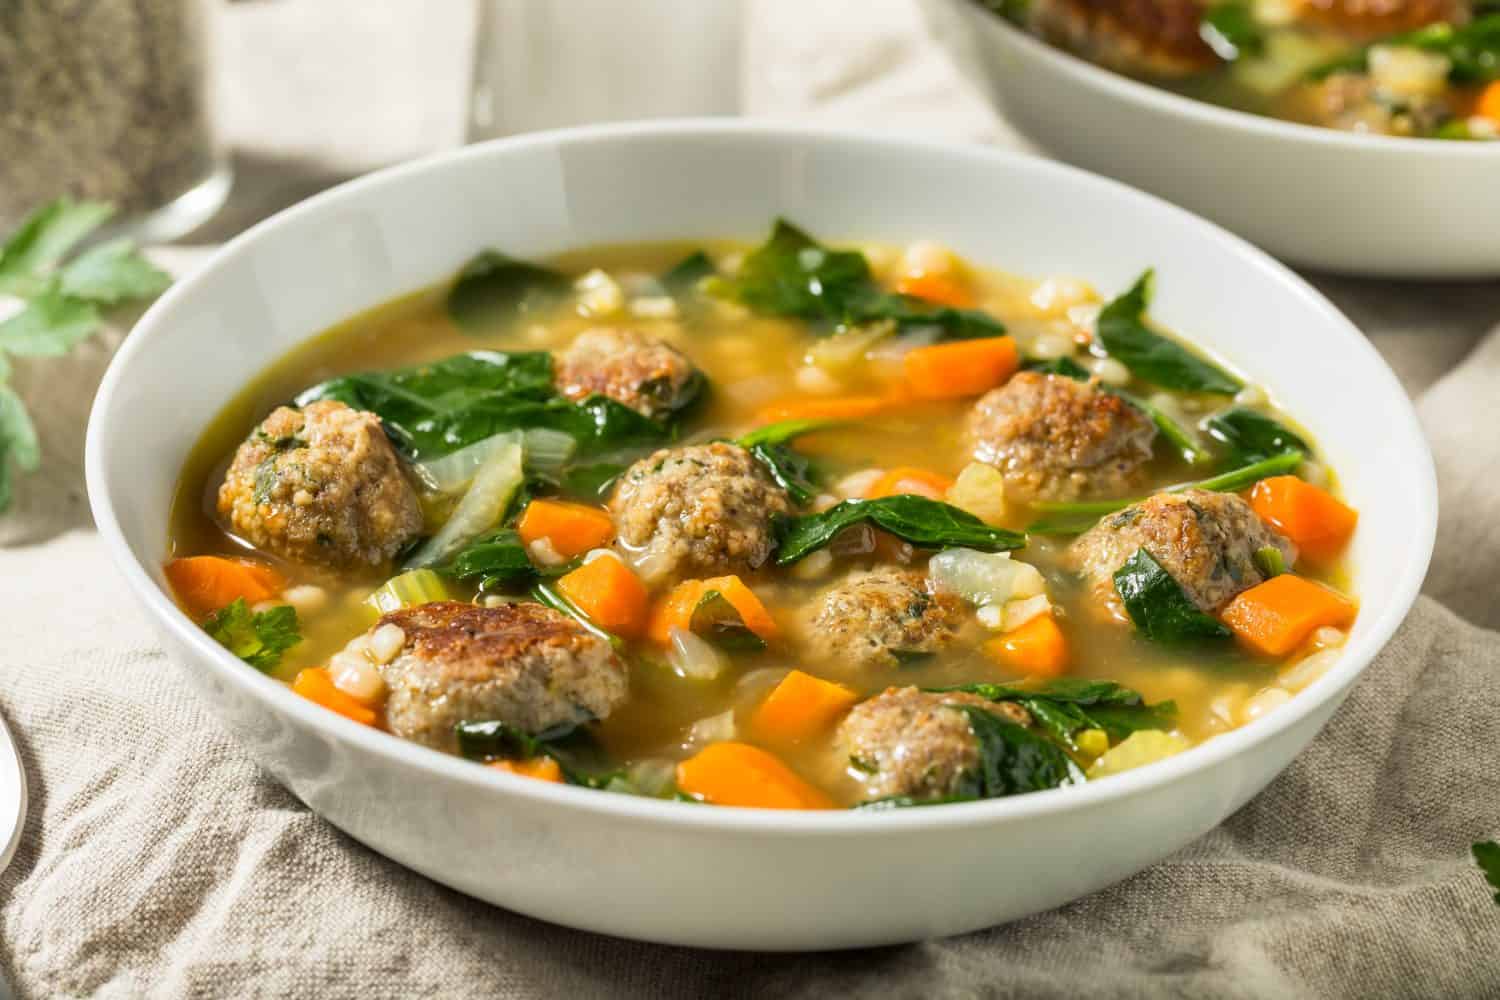 Hearty Homemade Italian Wedding Soup with Spinach and Meatballs